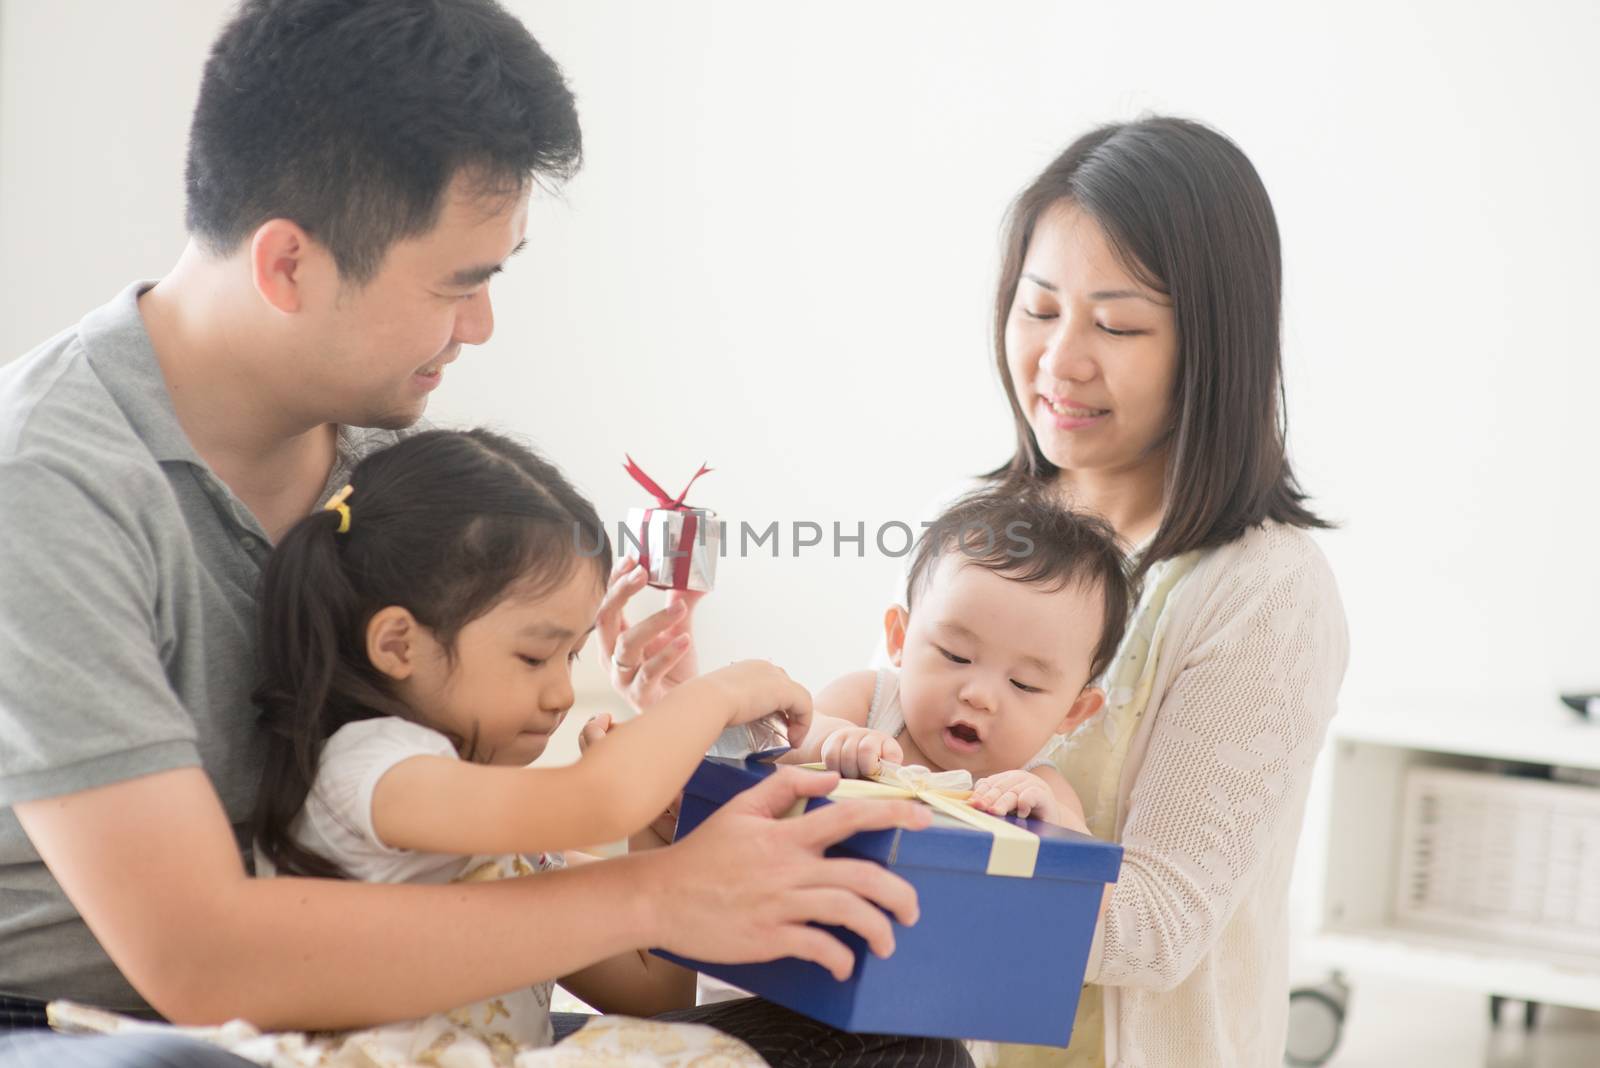 Parents and children boxing together. Asian family spending quality time at home, natural living lifestyle indoors.